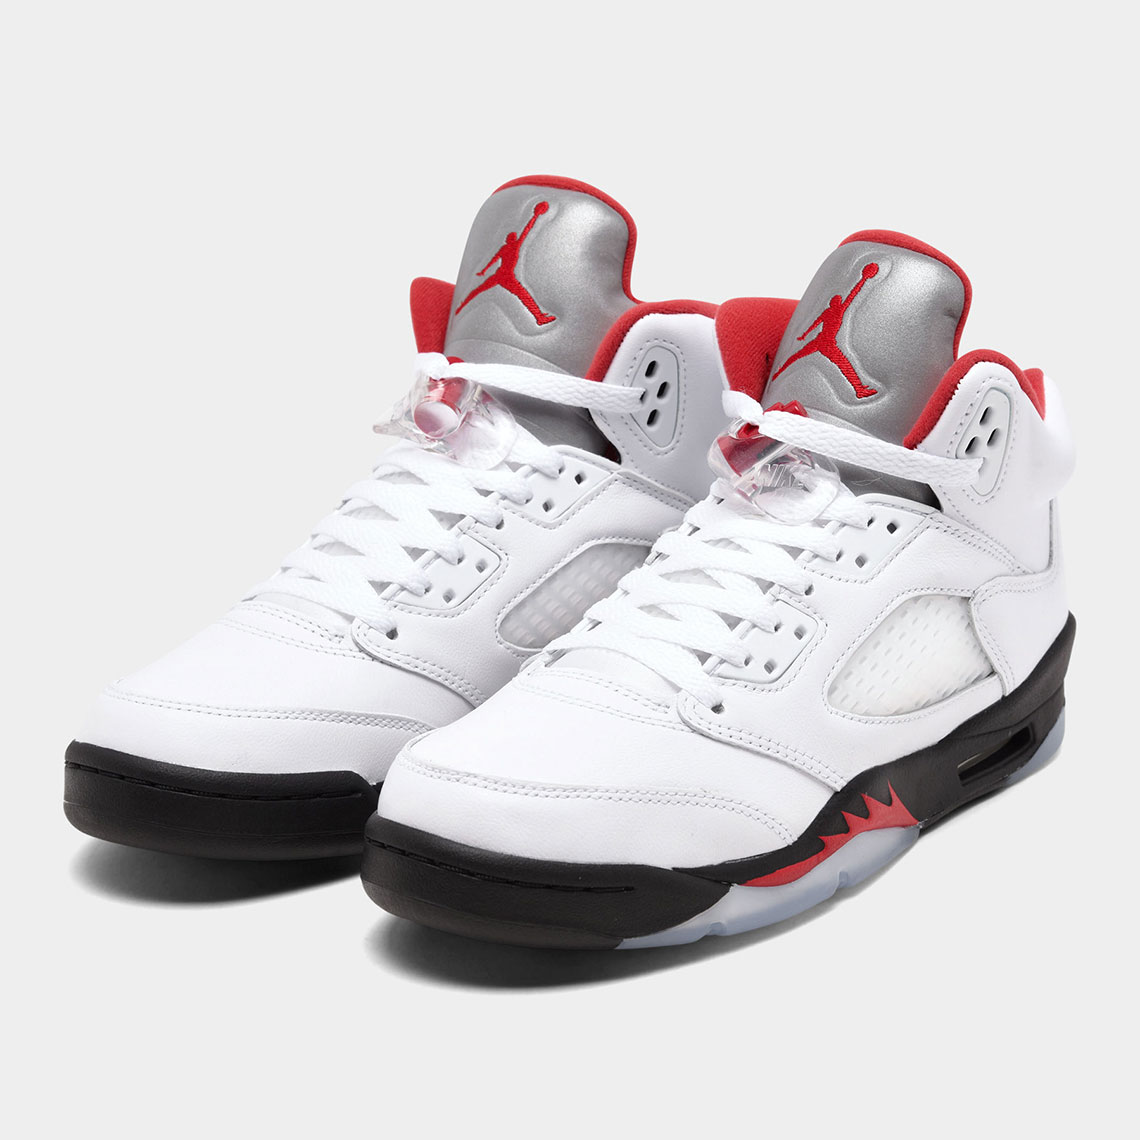 The Air Jordan 5 Retro “Fire Red” Has A New Release Date